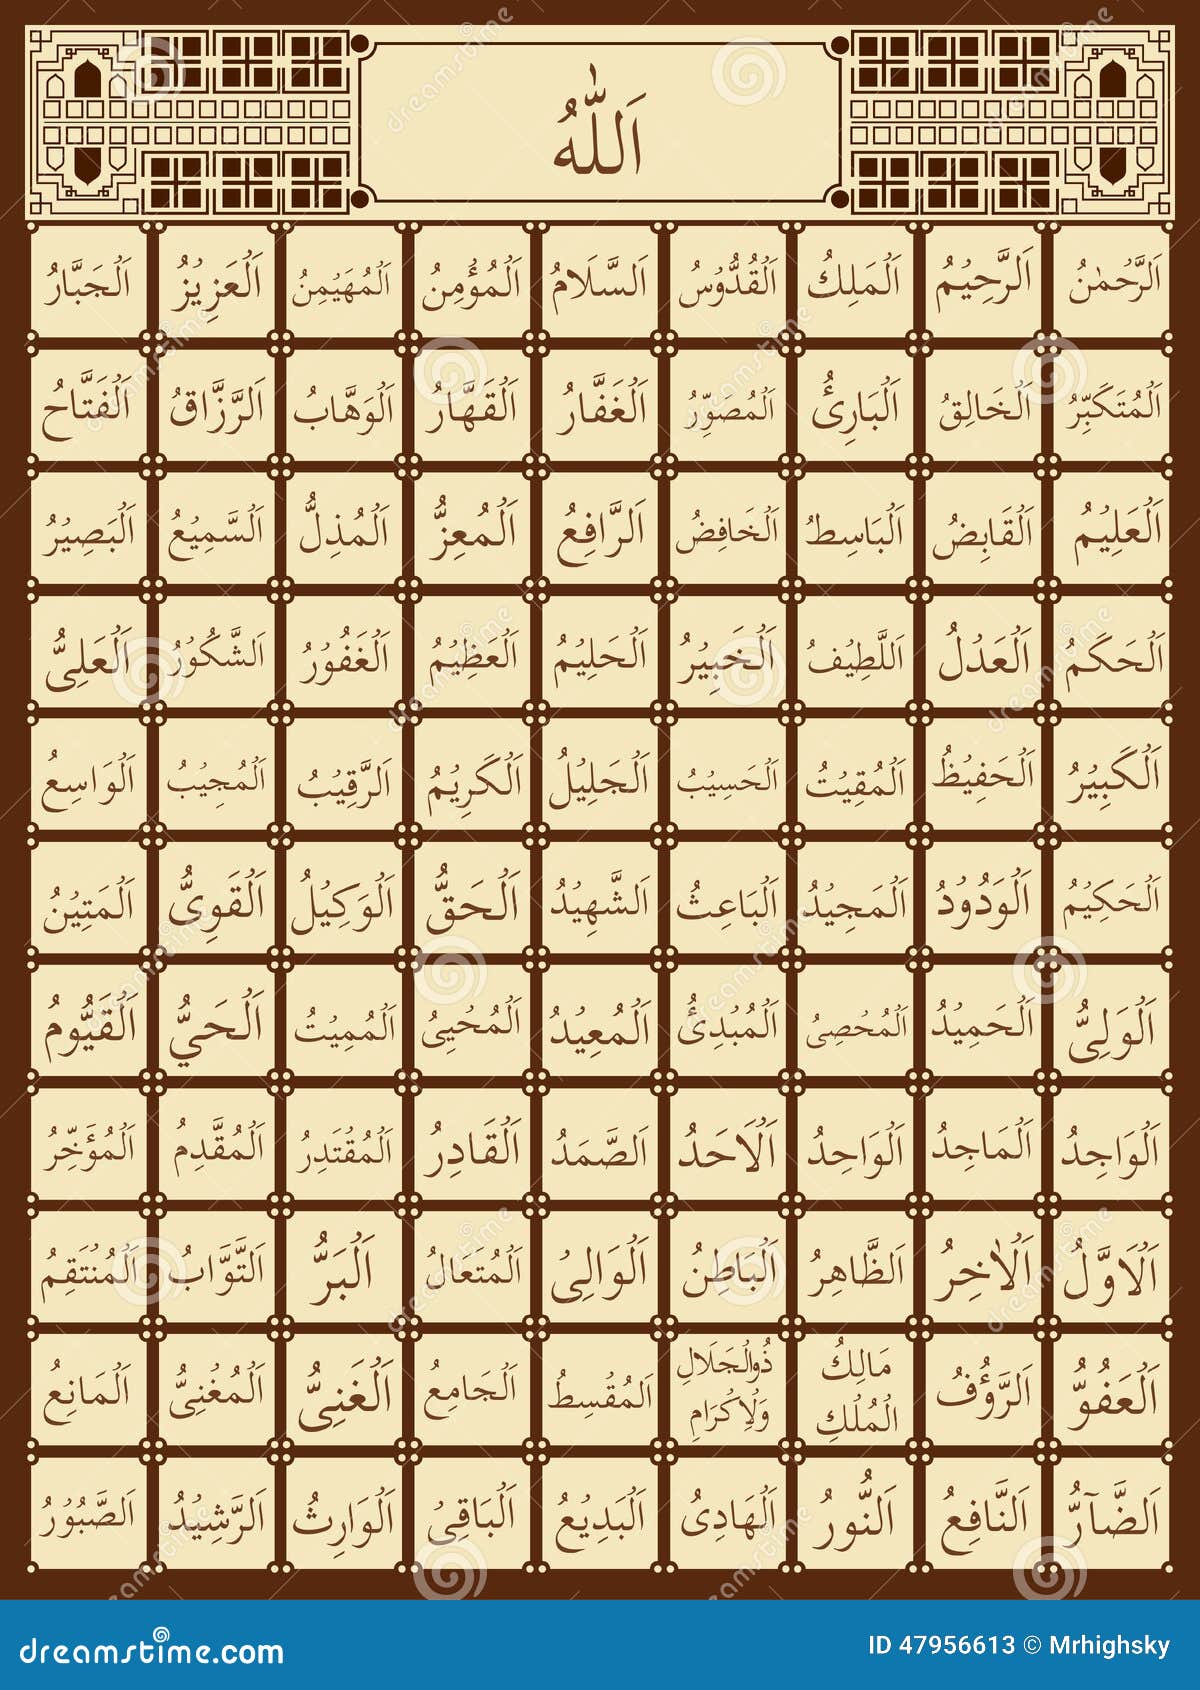 99 Names Of Allah Stock Vector Illustration Of Brownish 47956613